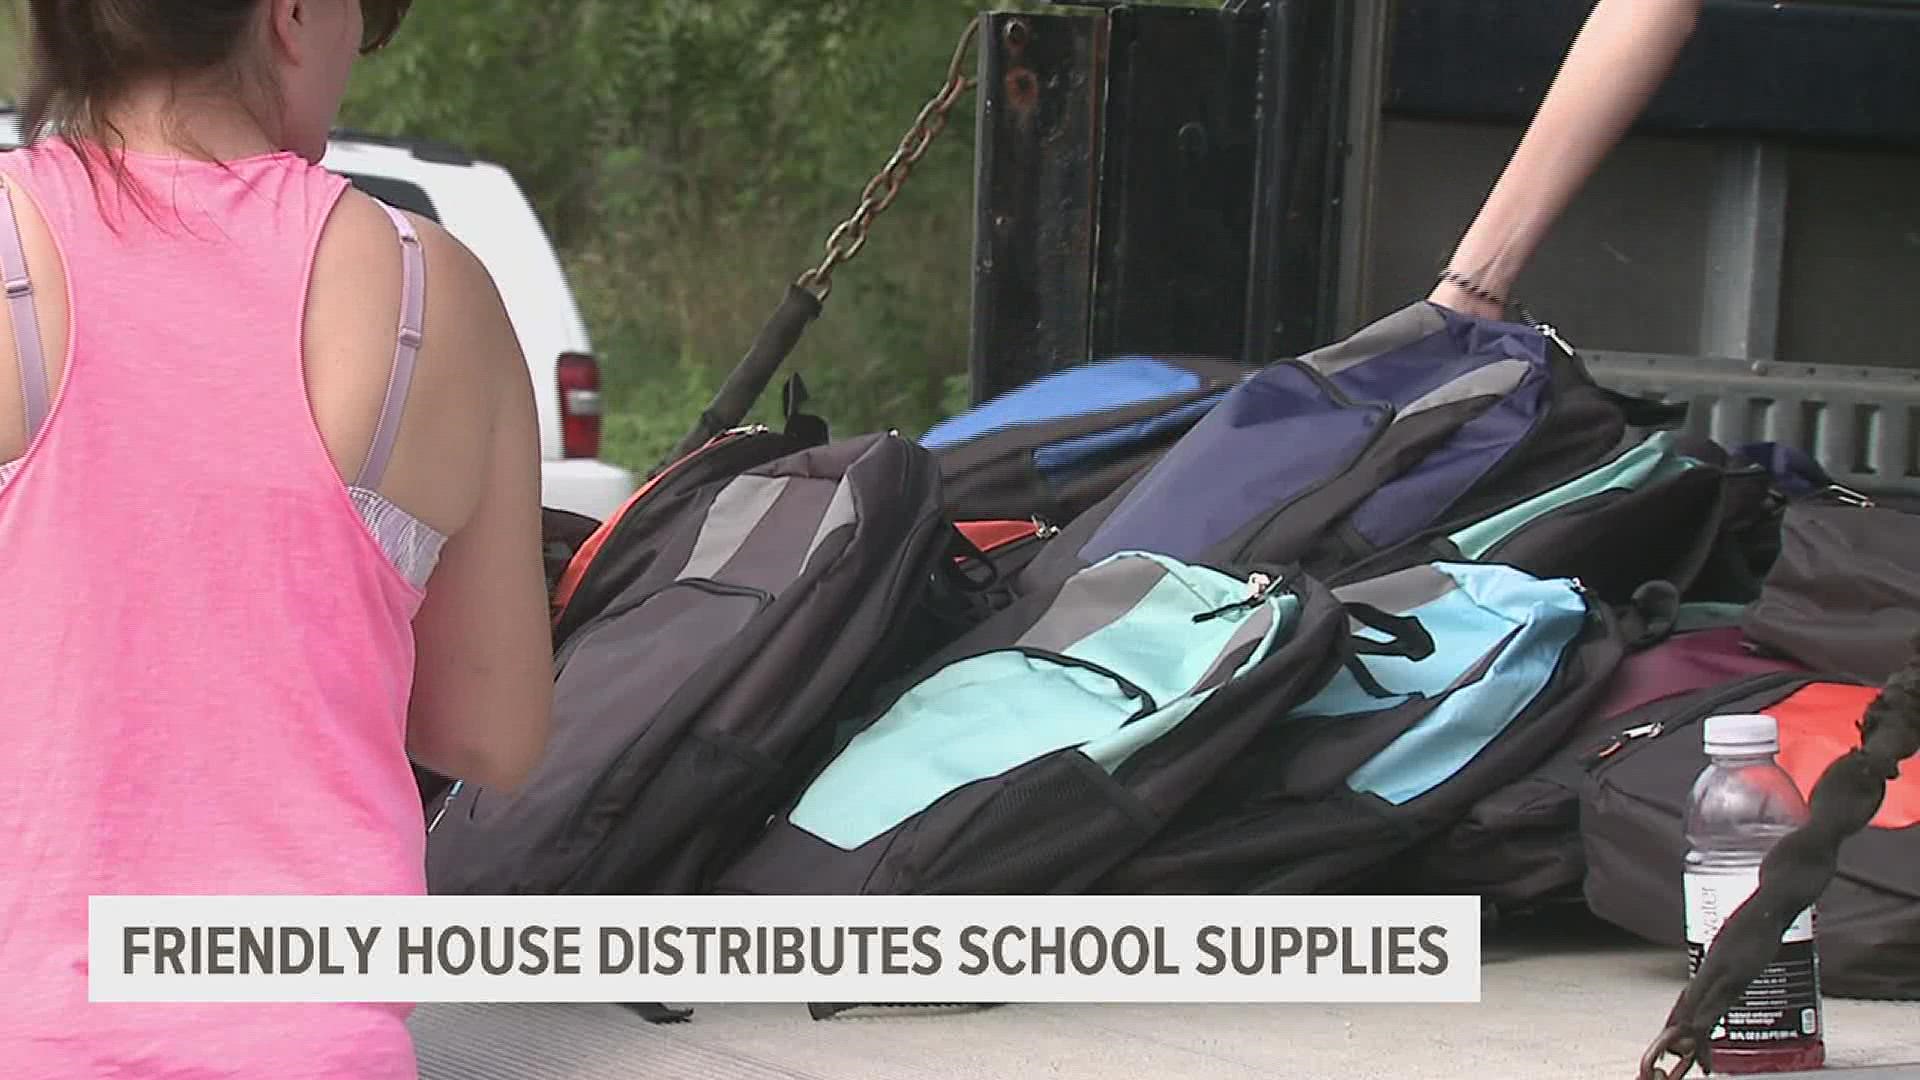 The Friendly House continued its over-100-year-long history of helping kids in need at its back-to-school supply drive on Thursday.